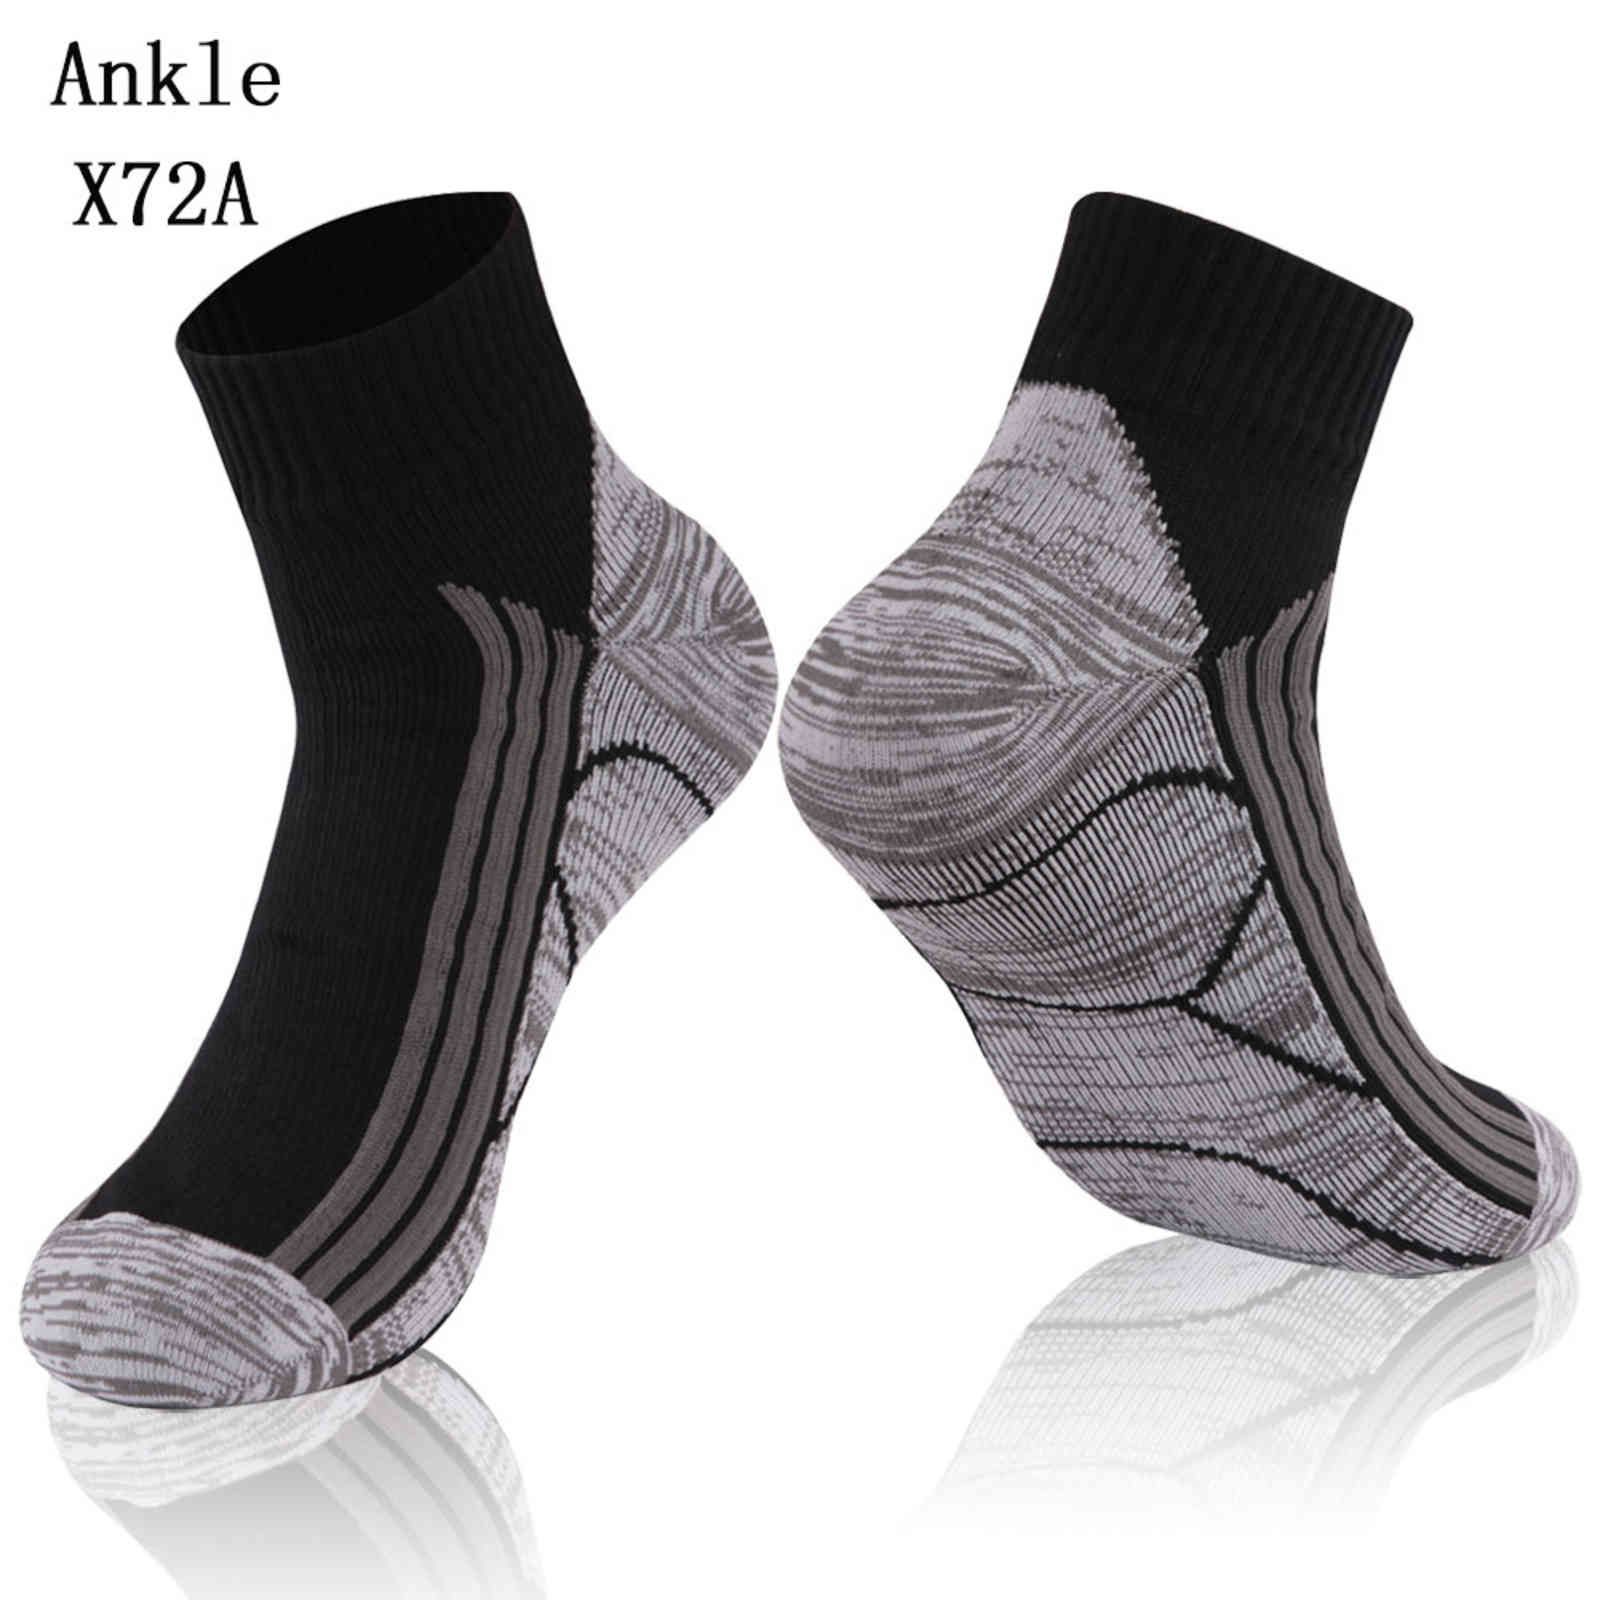 Ankle X72a